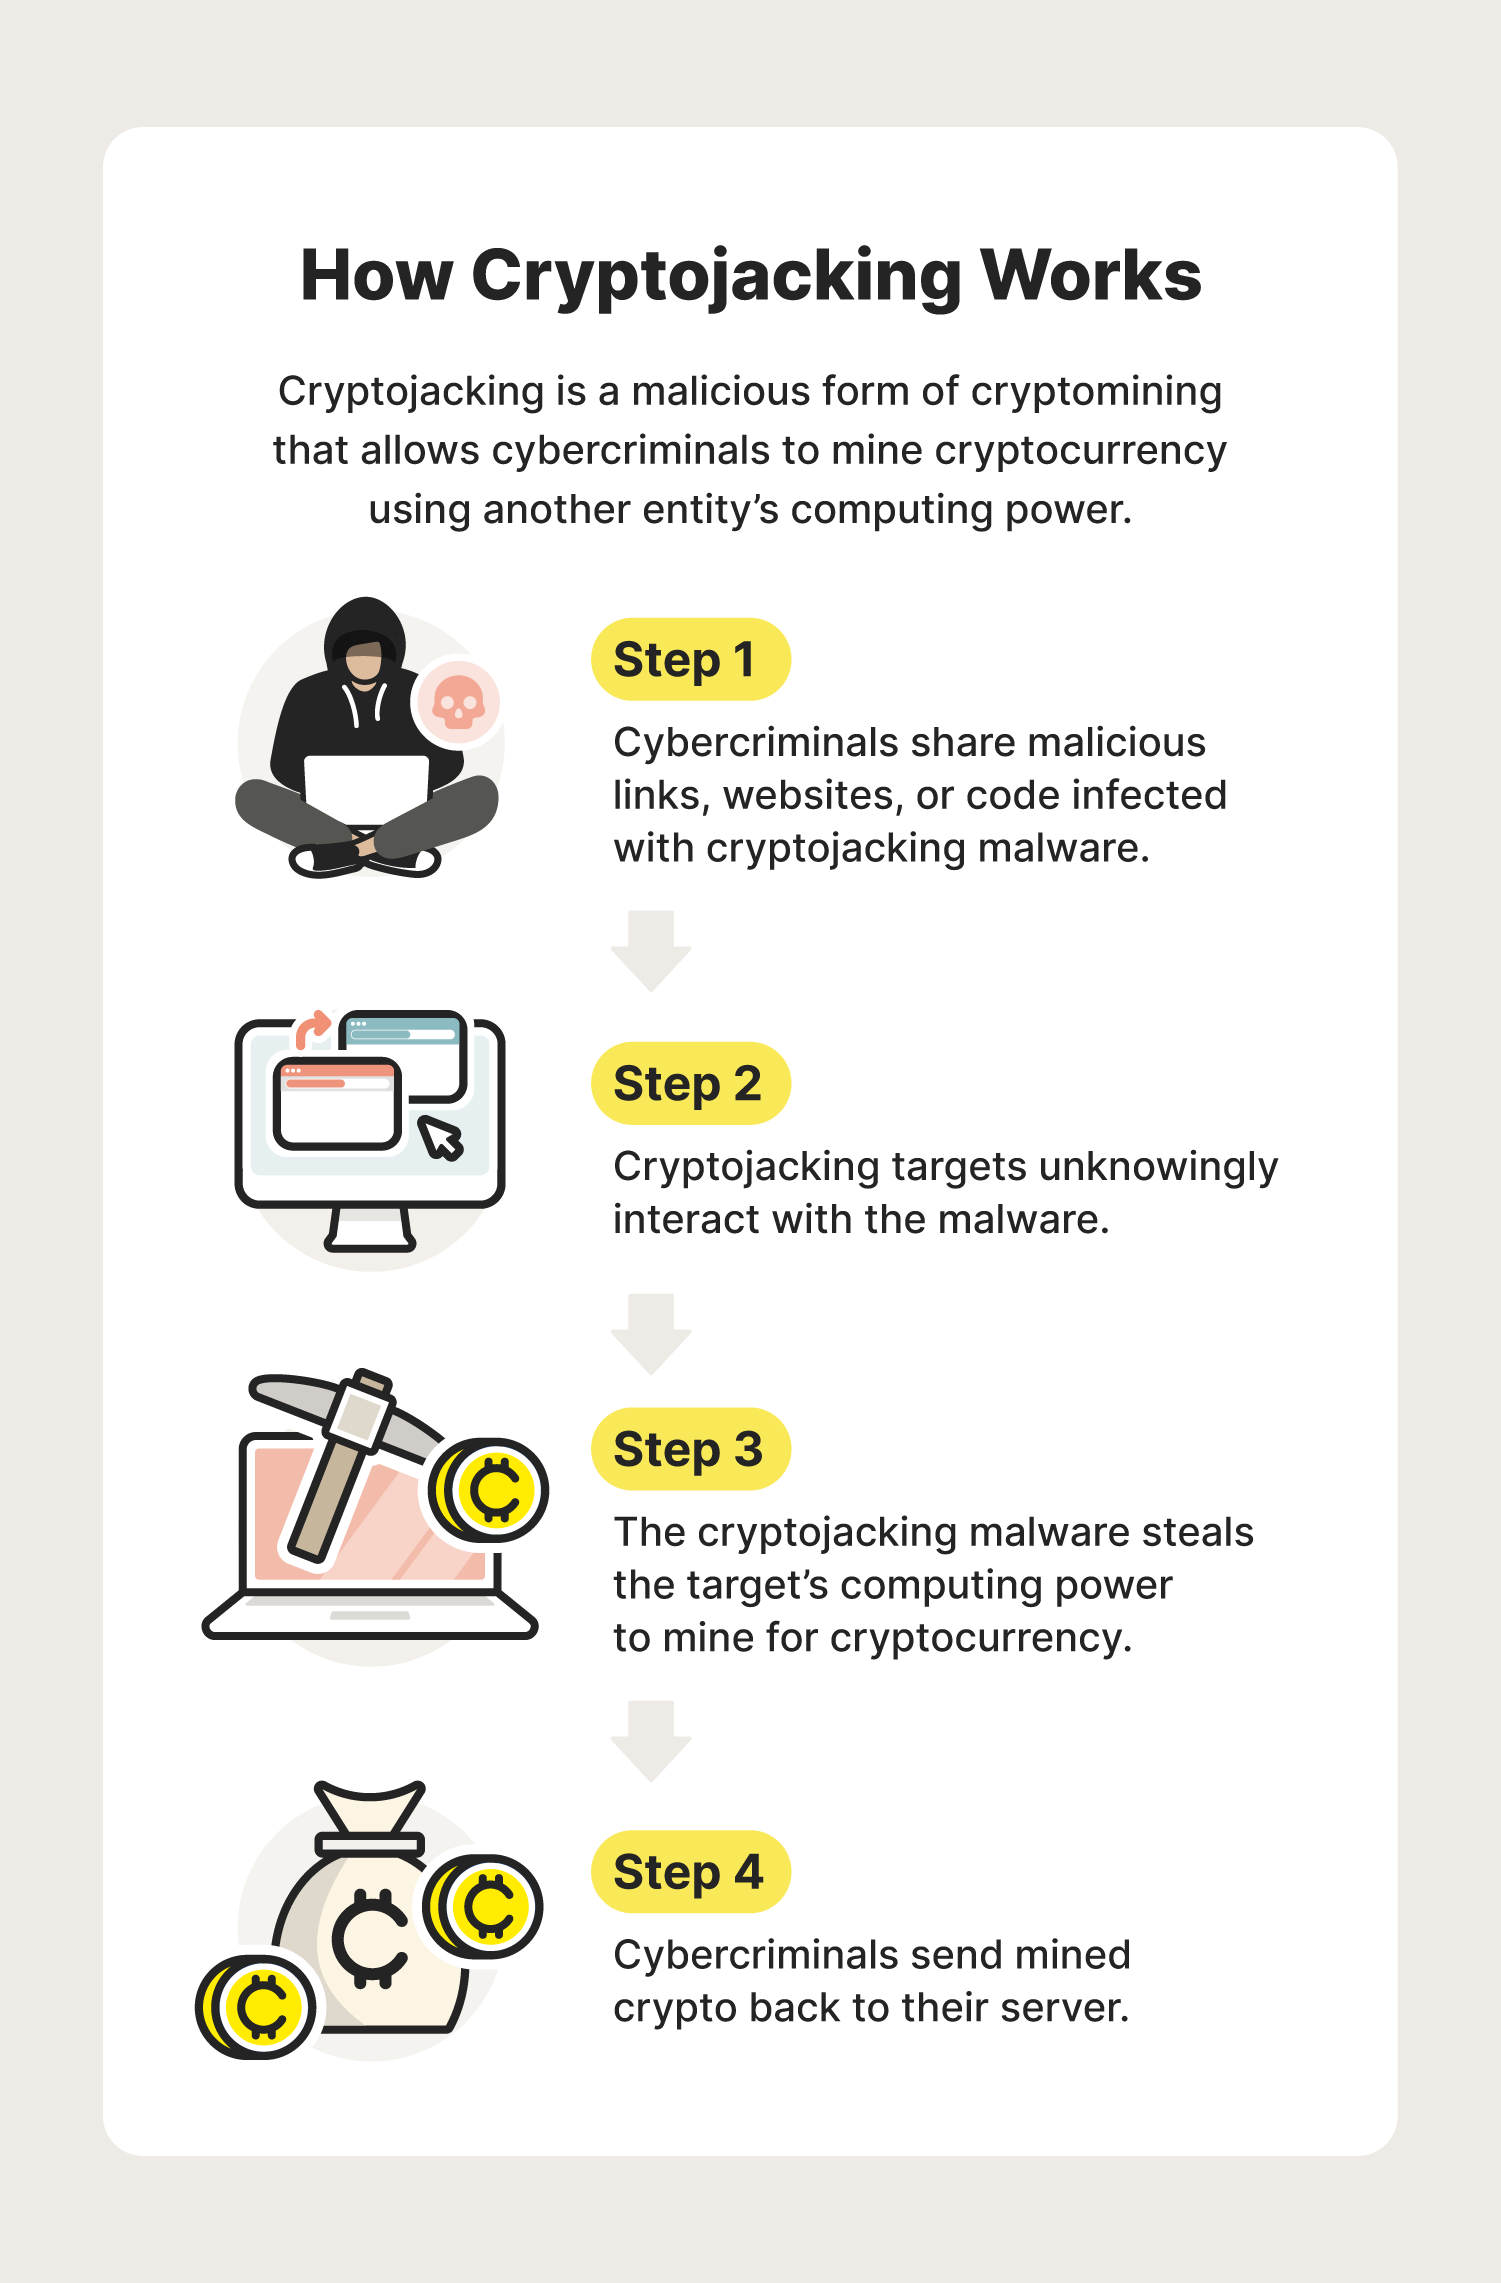 A graphic shows the four steps of how cryptojacking works.